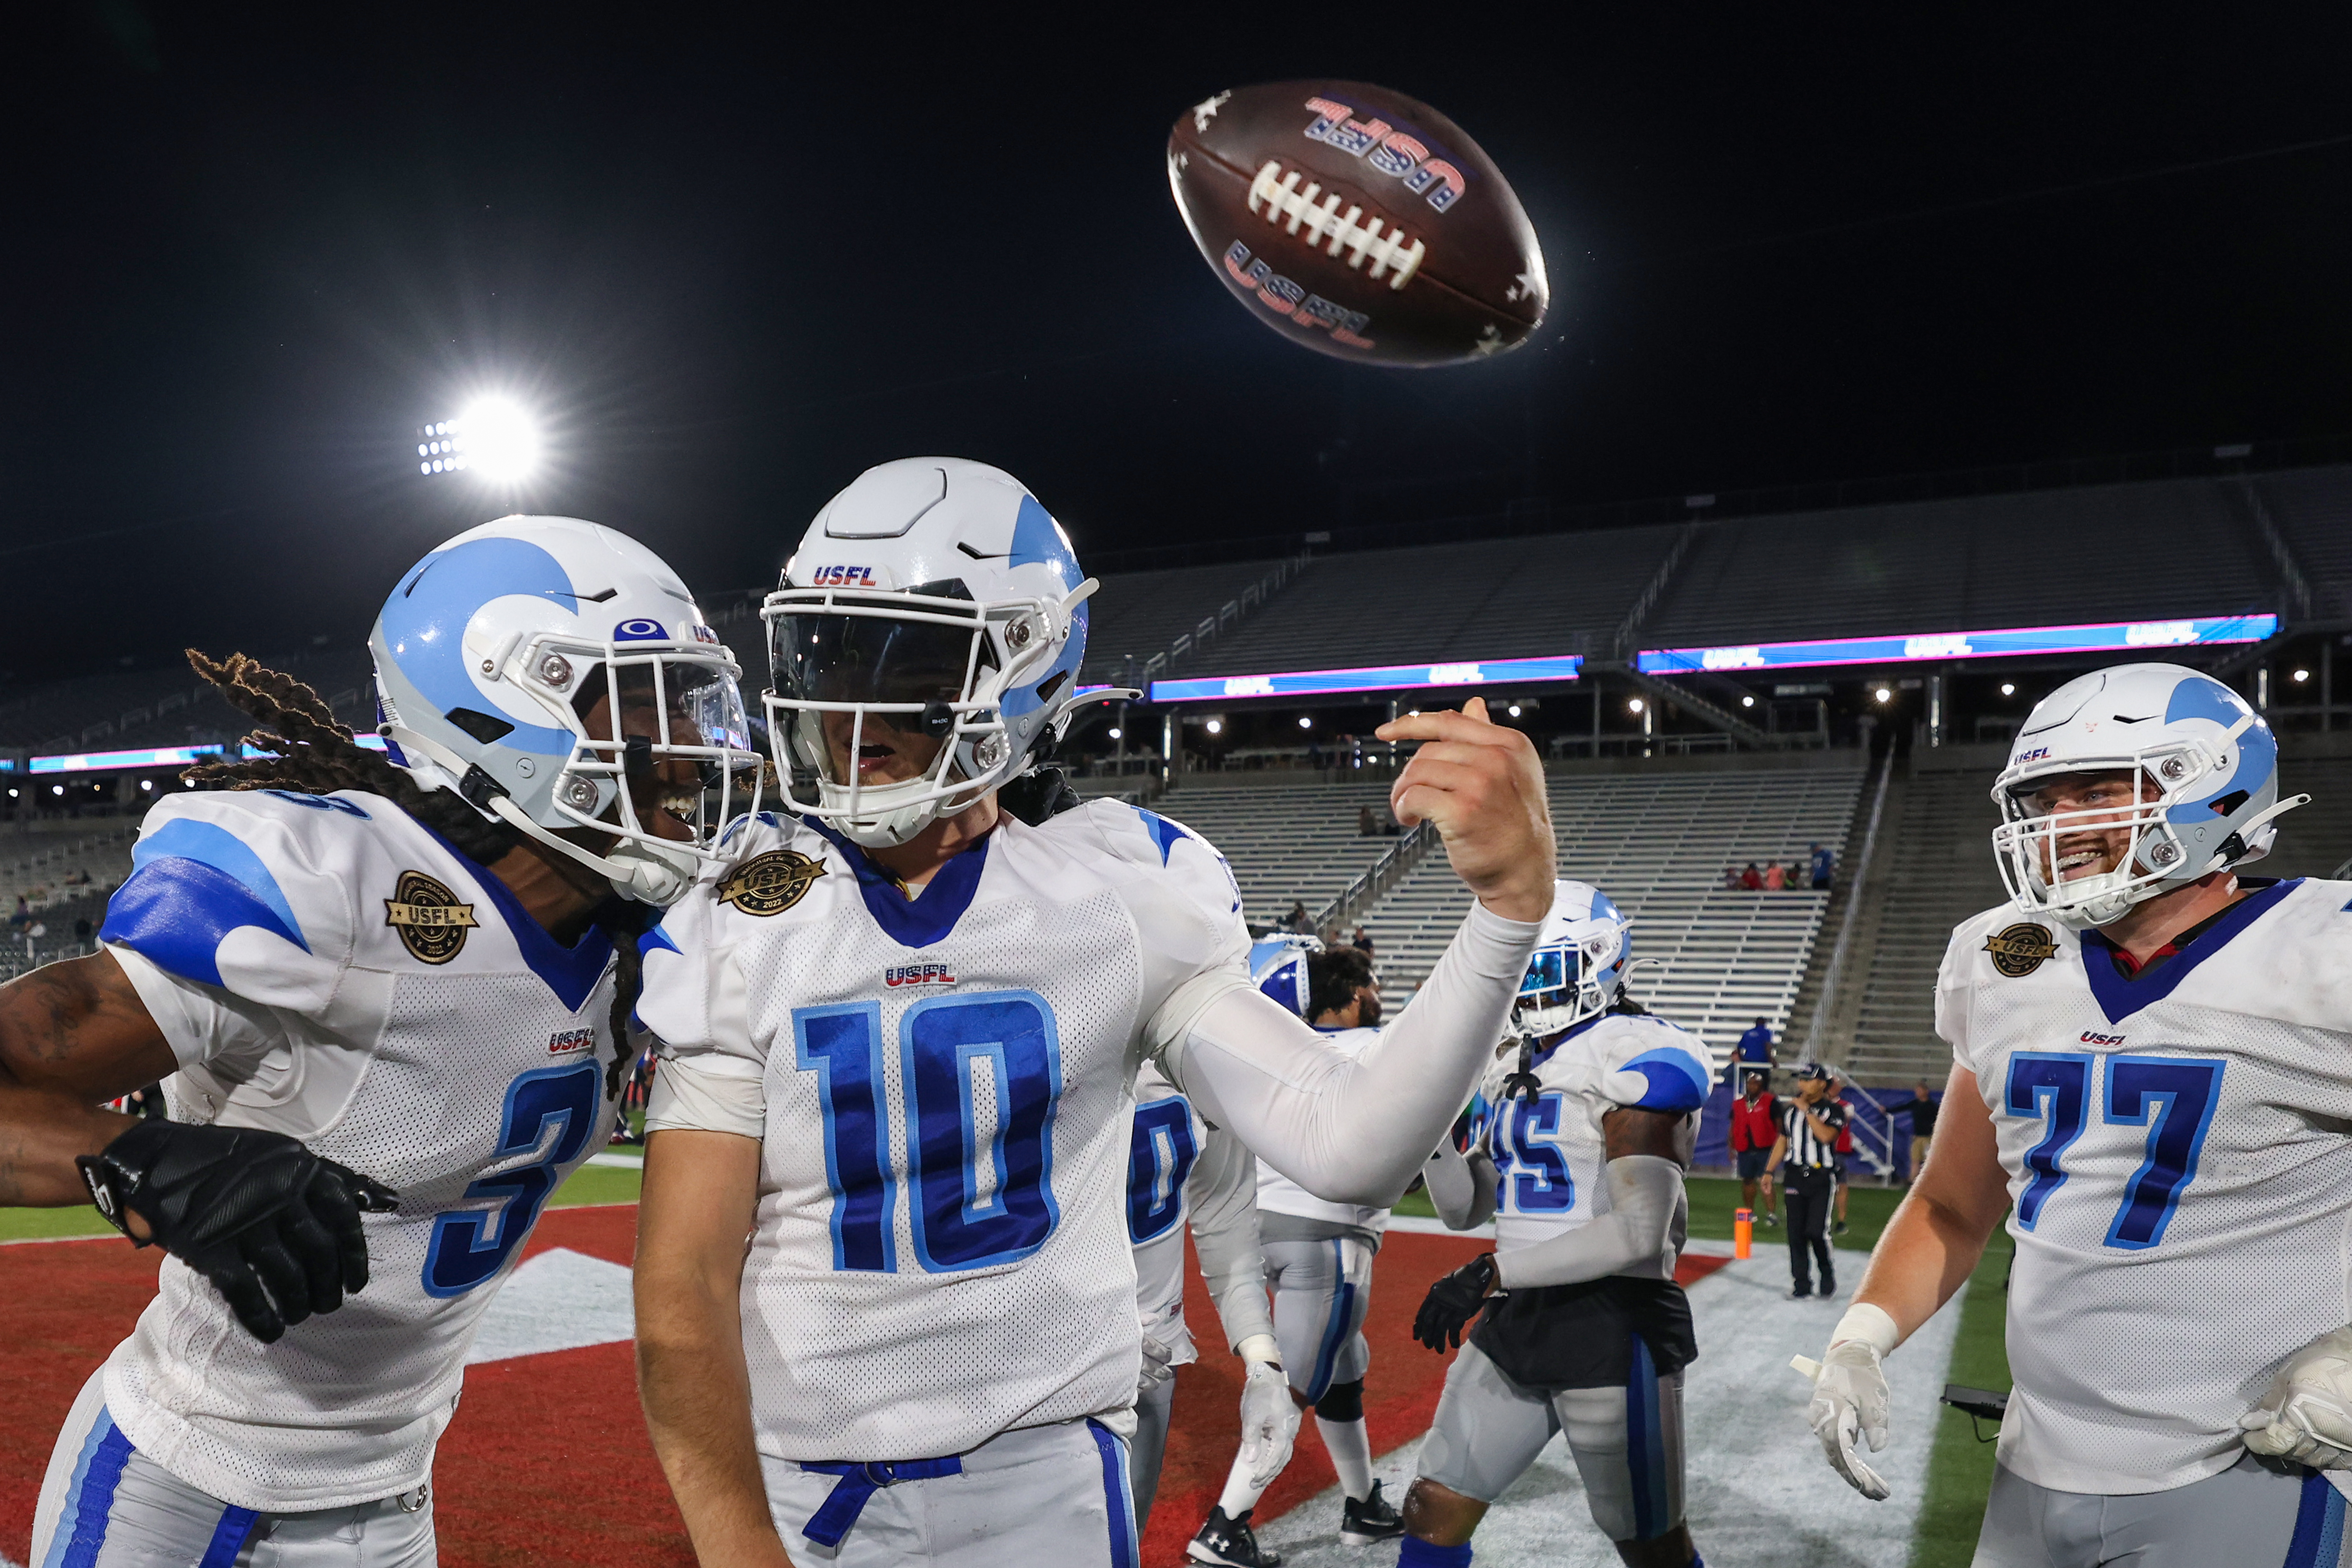 Quarterback Kyle Sloter #10 of the New Orleans Breakers celebrates after scoring the game-winning touchdown with teammate Adonis Alexander #3 in overtime against the Michigan Panthers at Protective Stadium on May 28, 2022 in Birmingham, Alabama.